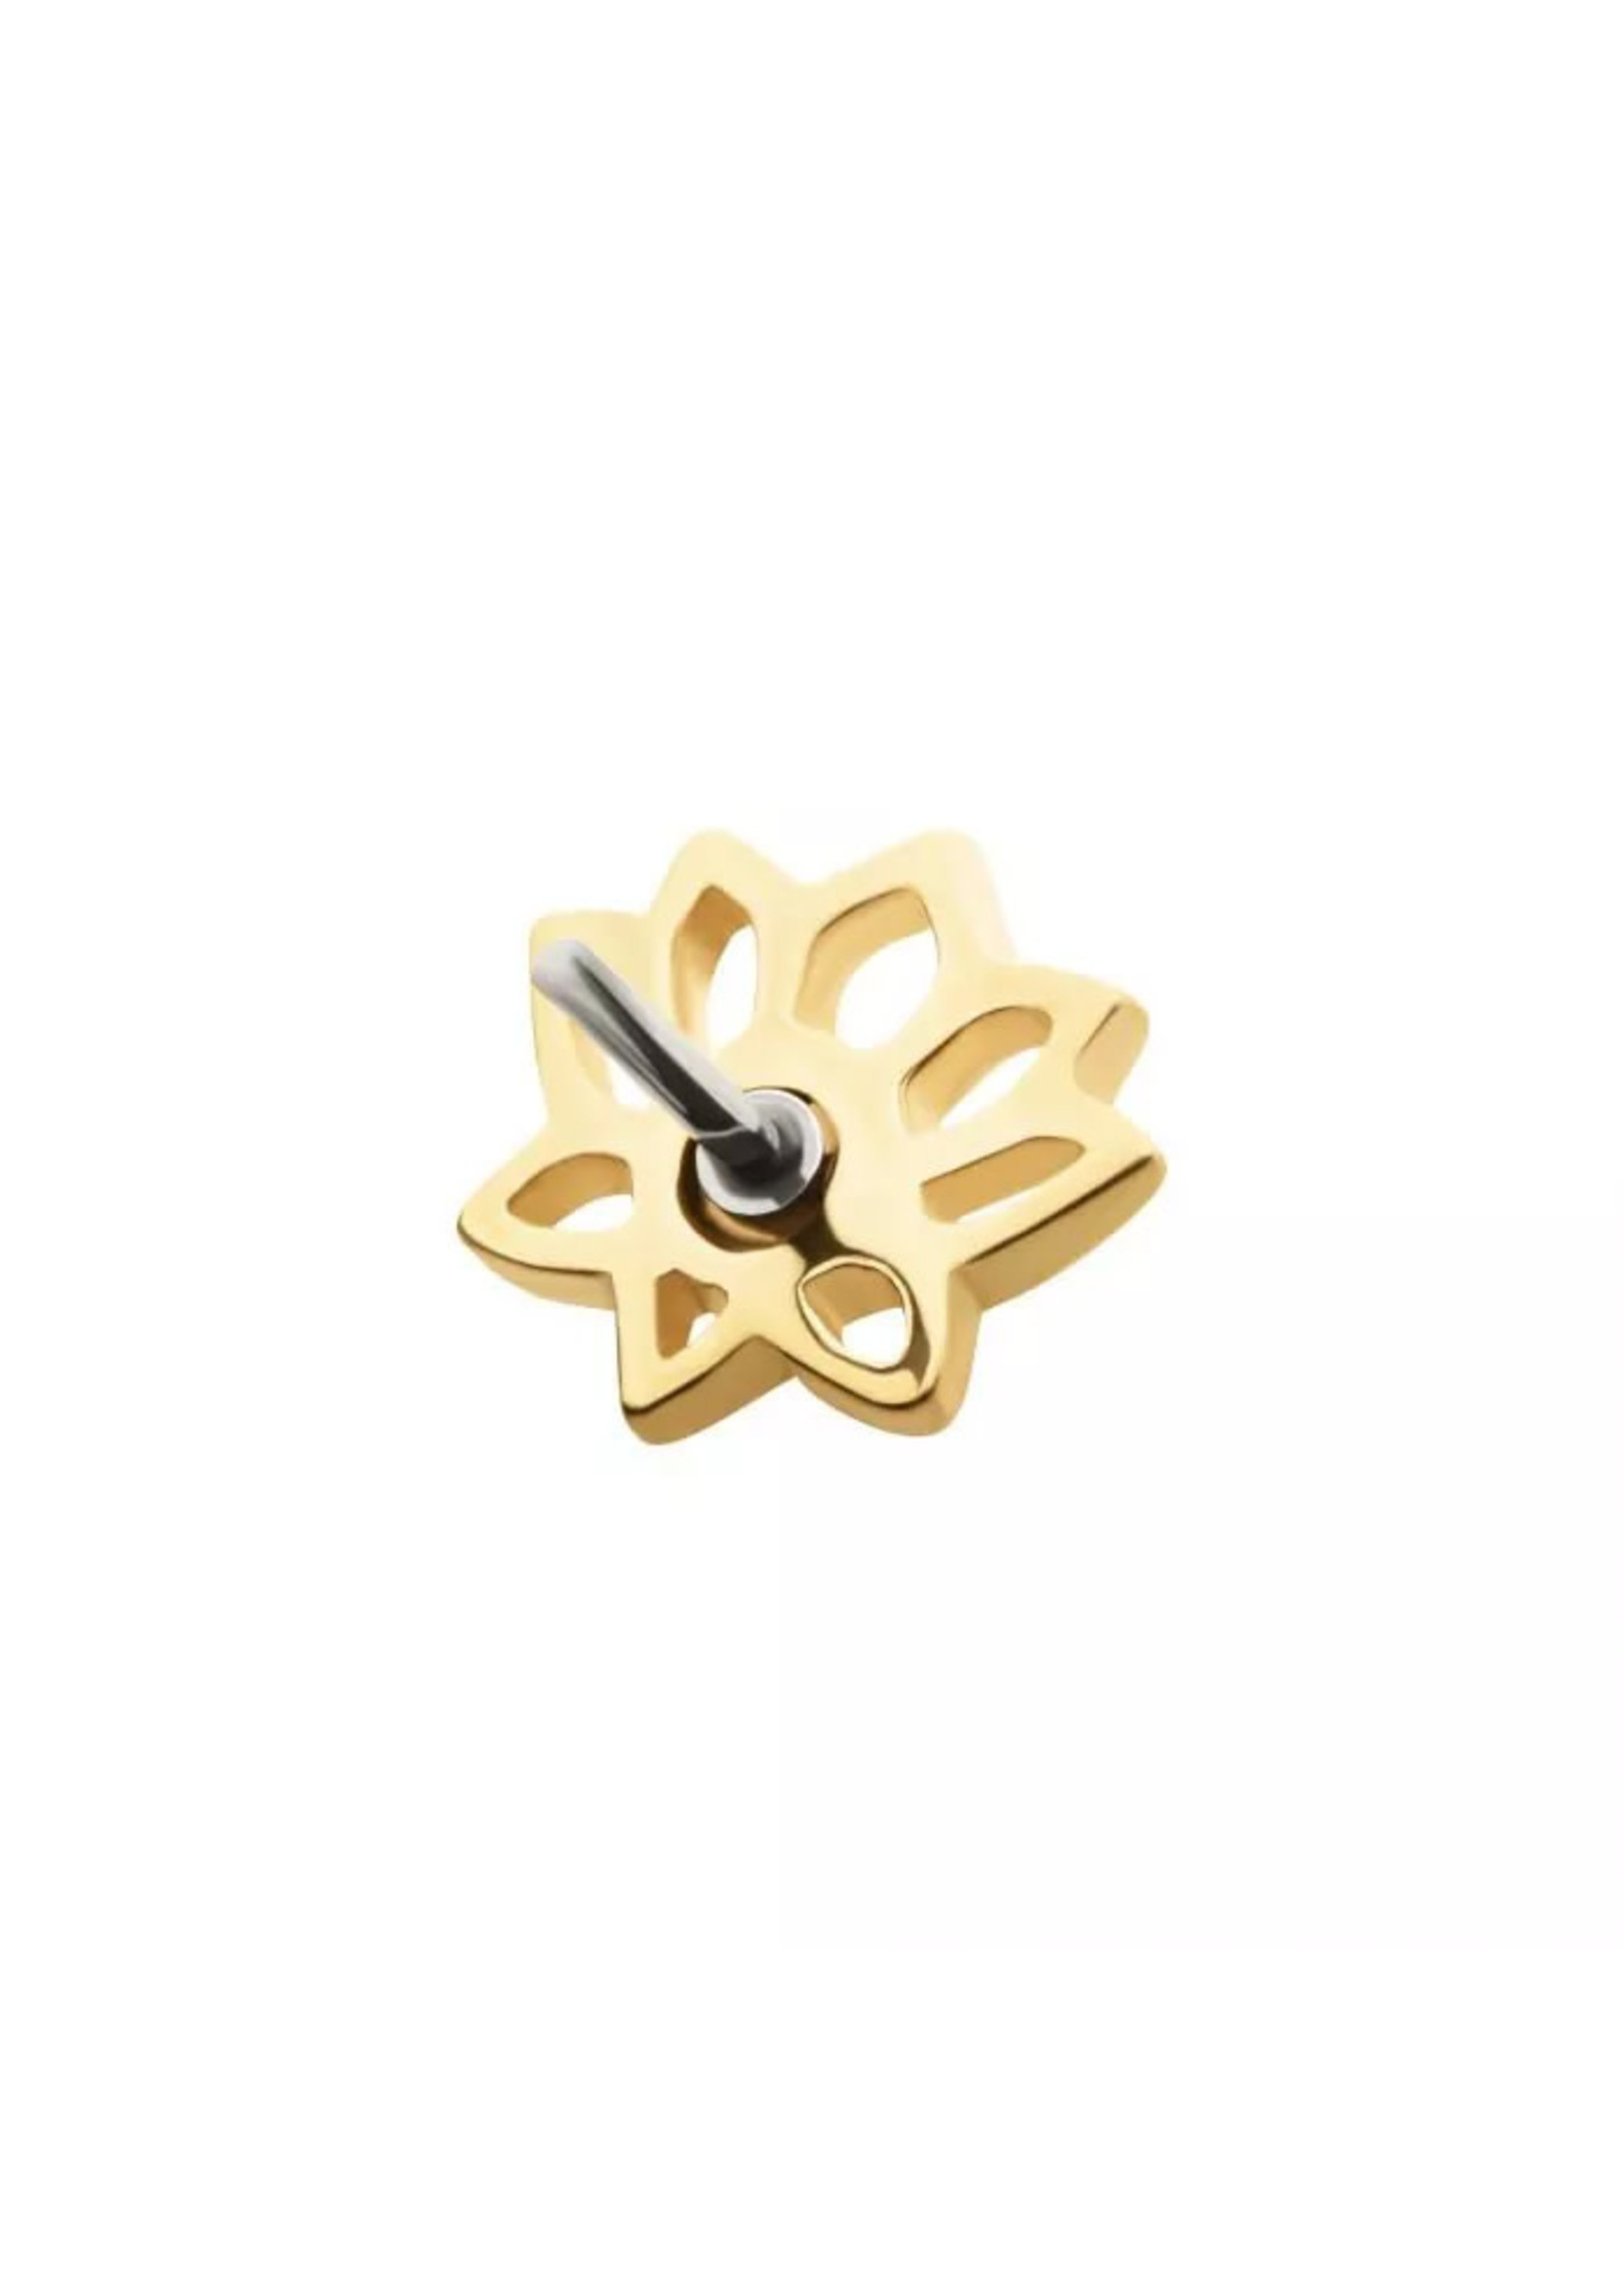 Invictus 14Kt Yellow Gold Threadless with CZ/Opal Lotus Flower Top